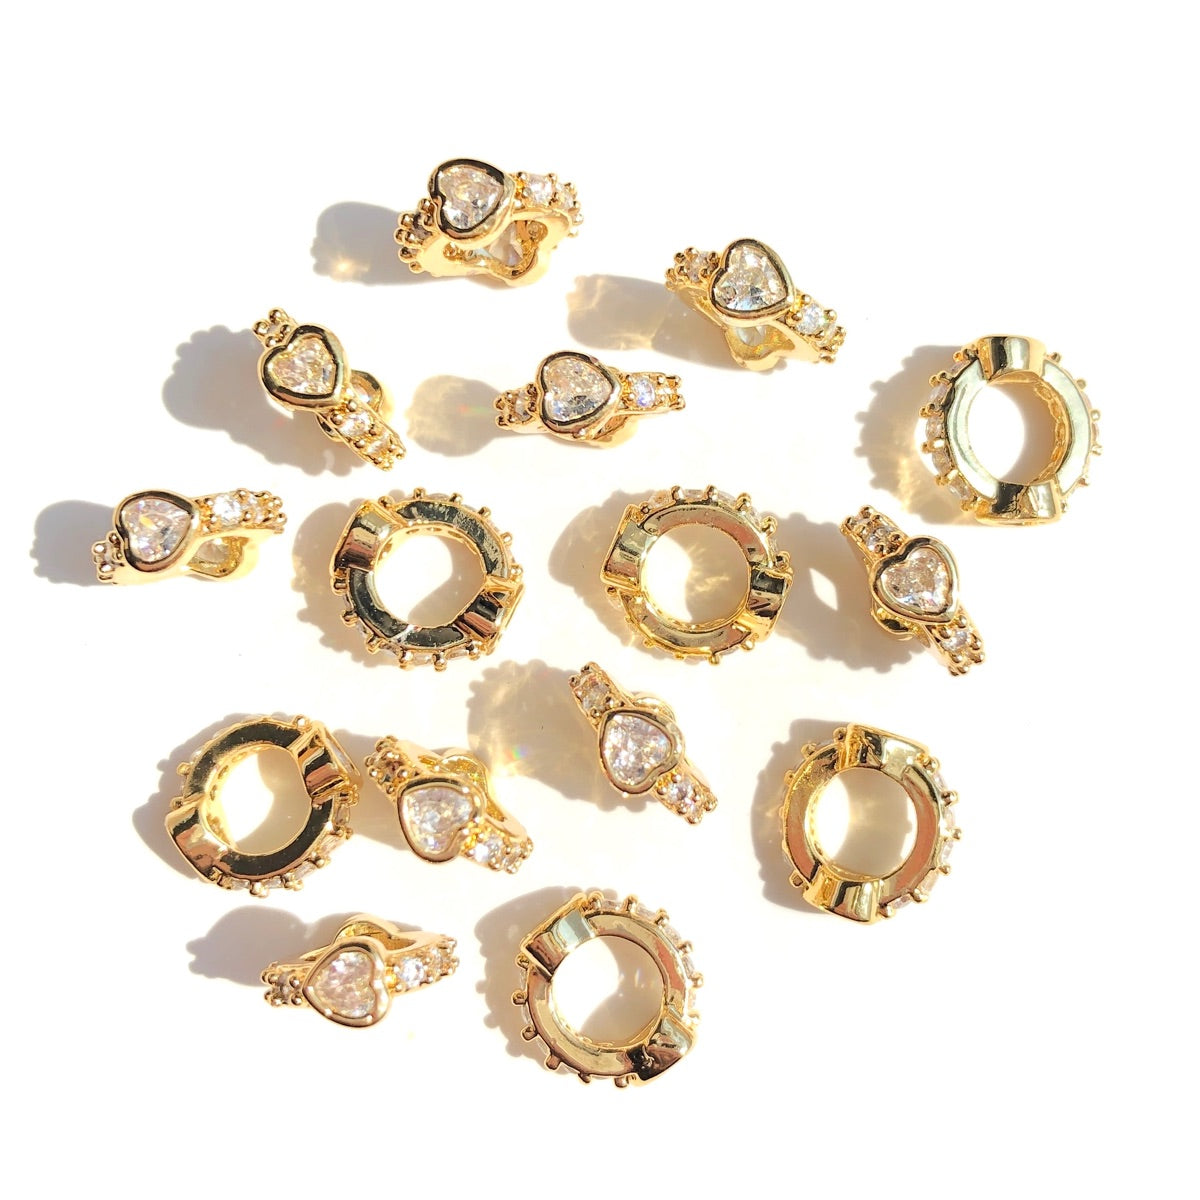 20-50pcs/lot 9mm CZ Pave Heart Ring Rondelle Wheel Spacers Gold CZ Paved Spacers Big Hole Beads New Spacers Arrivals Rondelle Beads Wholesale Charms Beads Beyond